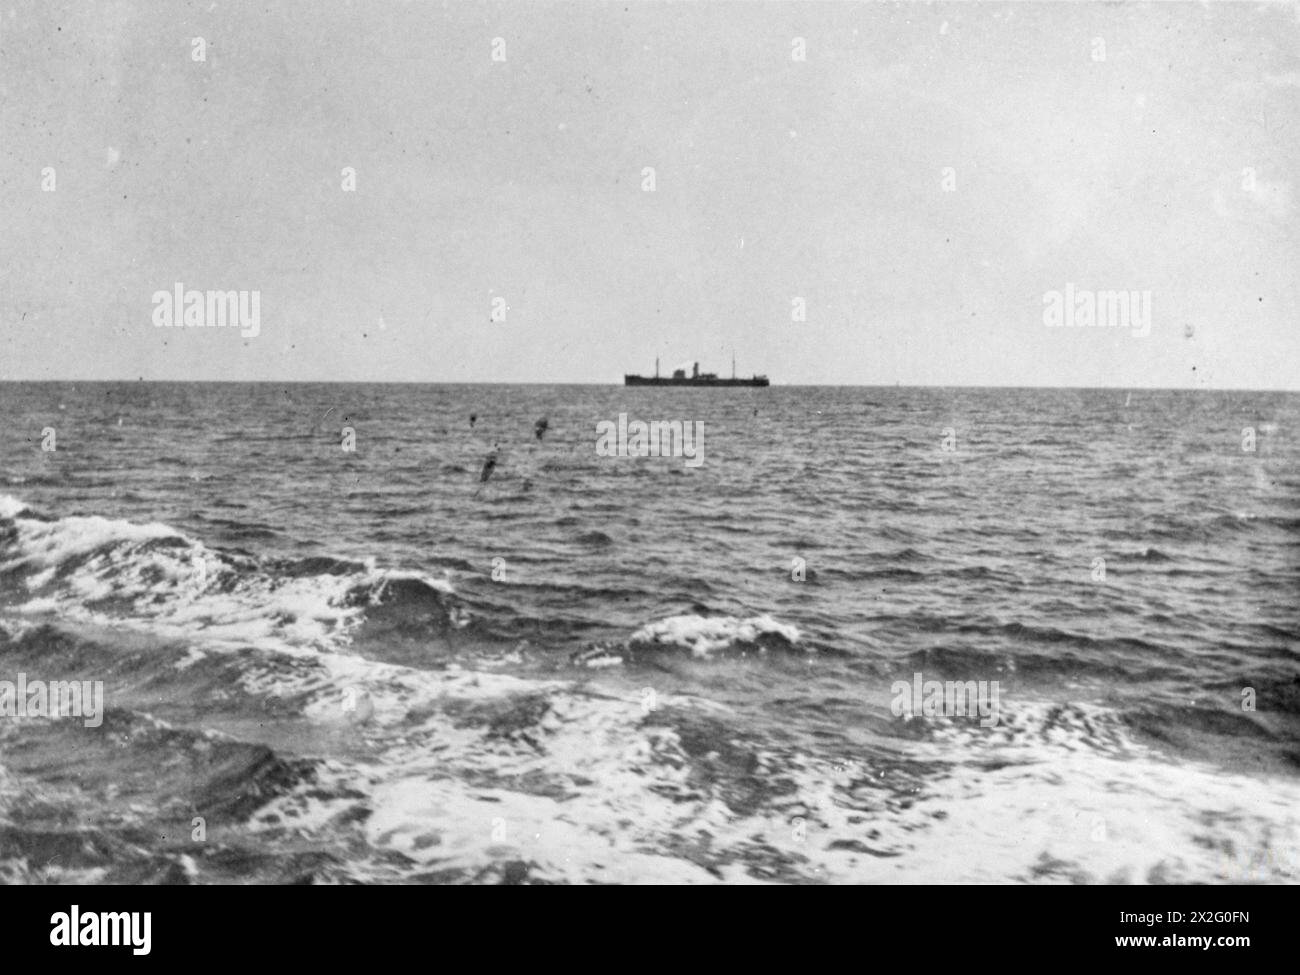 THE INTERCEPTION AND SCUTTLING OF THE GERMAN SS IDARWALD. 8 AND 9 DECEMBER 1940, ON BOARD A BRITISH WARSHIP OFF CUBA. THE GERMAN HAMBURG-AMERIKA FREIGHTER IDARWALD WAS INTERCEPTED BY A PATROLLING BRITISH WARSHIP OFF CUBA. THE GERMAN CREW AT ONCE SCUTTLED THEIR SHIP, SET FIRE TO HER, AND TOOK TO THEIR BOATS. THE BRITISH SHIP FOUGHT THE FIRE AND TOOK THE IDARWALD IN TOW, BUT SHE HAD TO BE CAST OFF SHORTLY THEREAFTER AND SANK. - The British warship approaches the IDARWALD Stock Photo